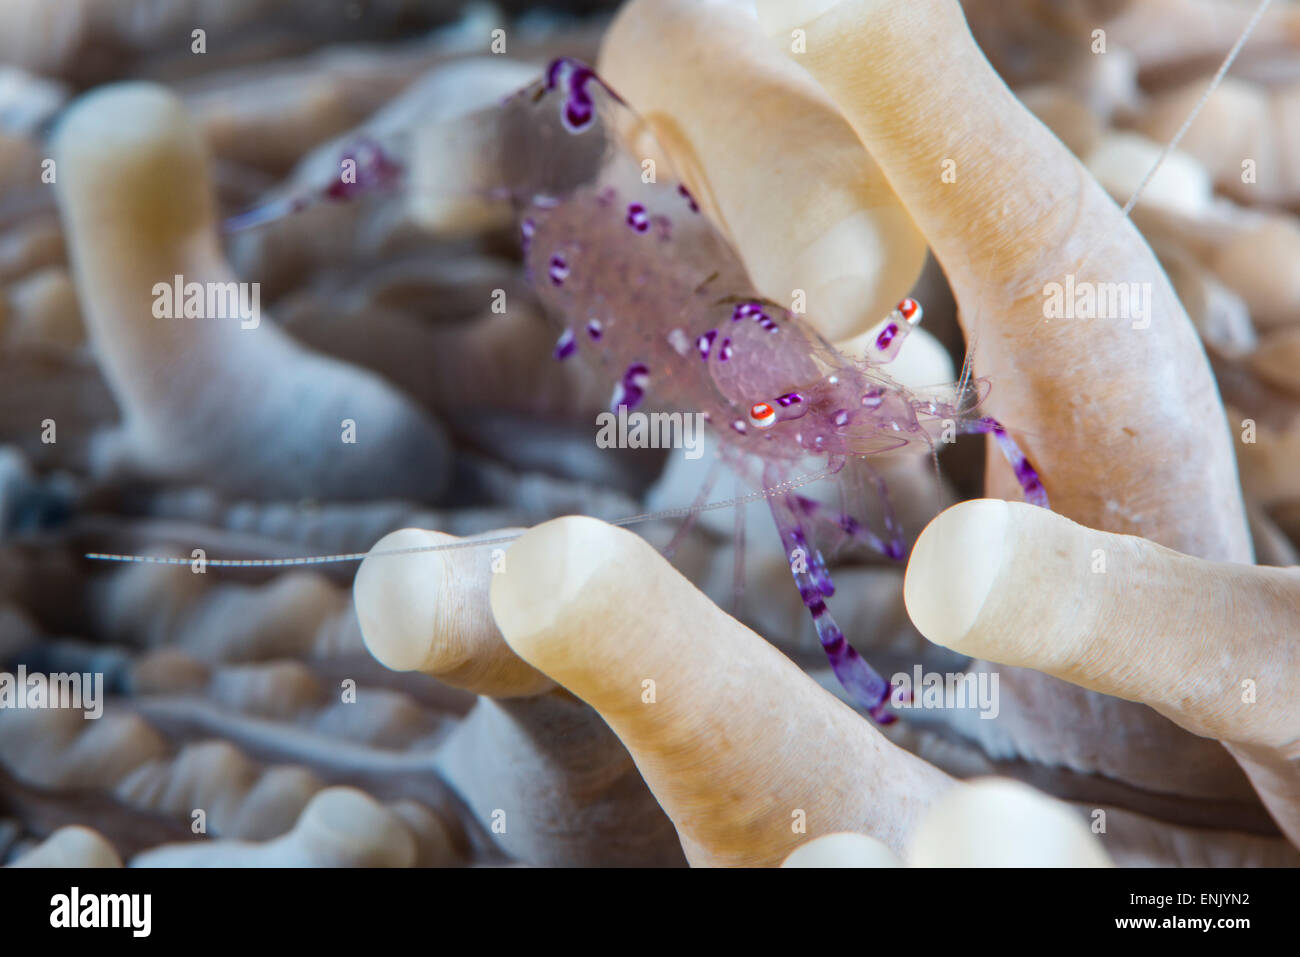 Anemone shrimp (Periclimenes holthuisi) in the tentacles of its host anemome, Queensland, Australia, Pacific Stock Photo